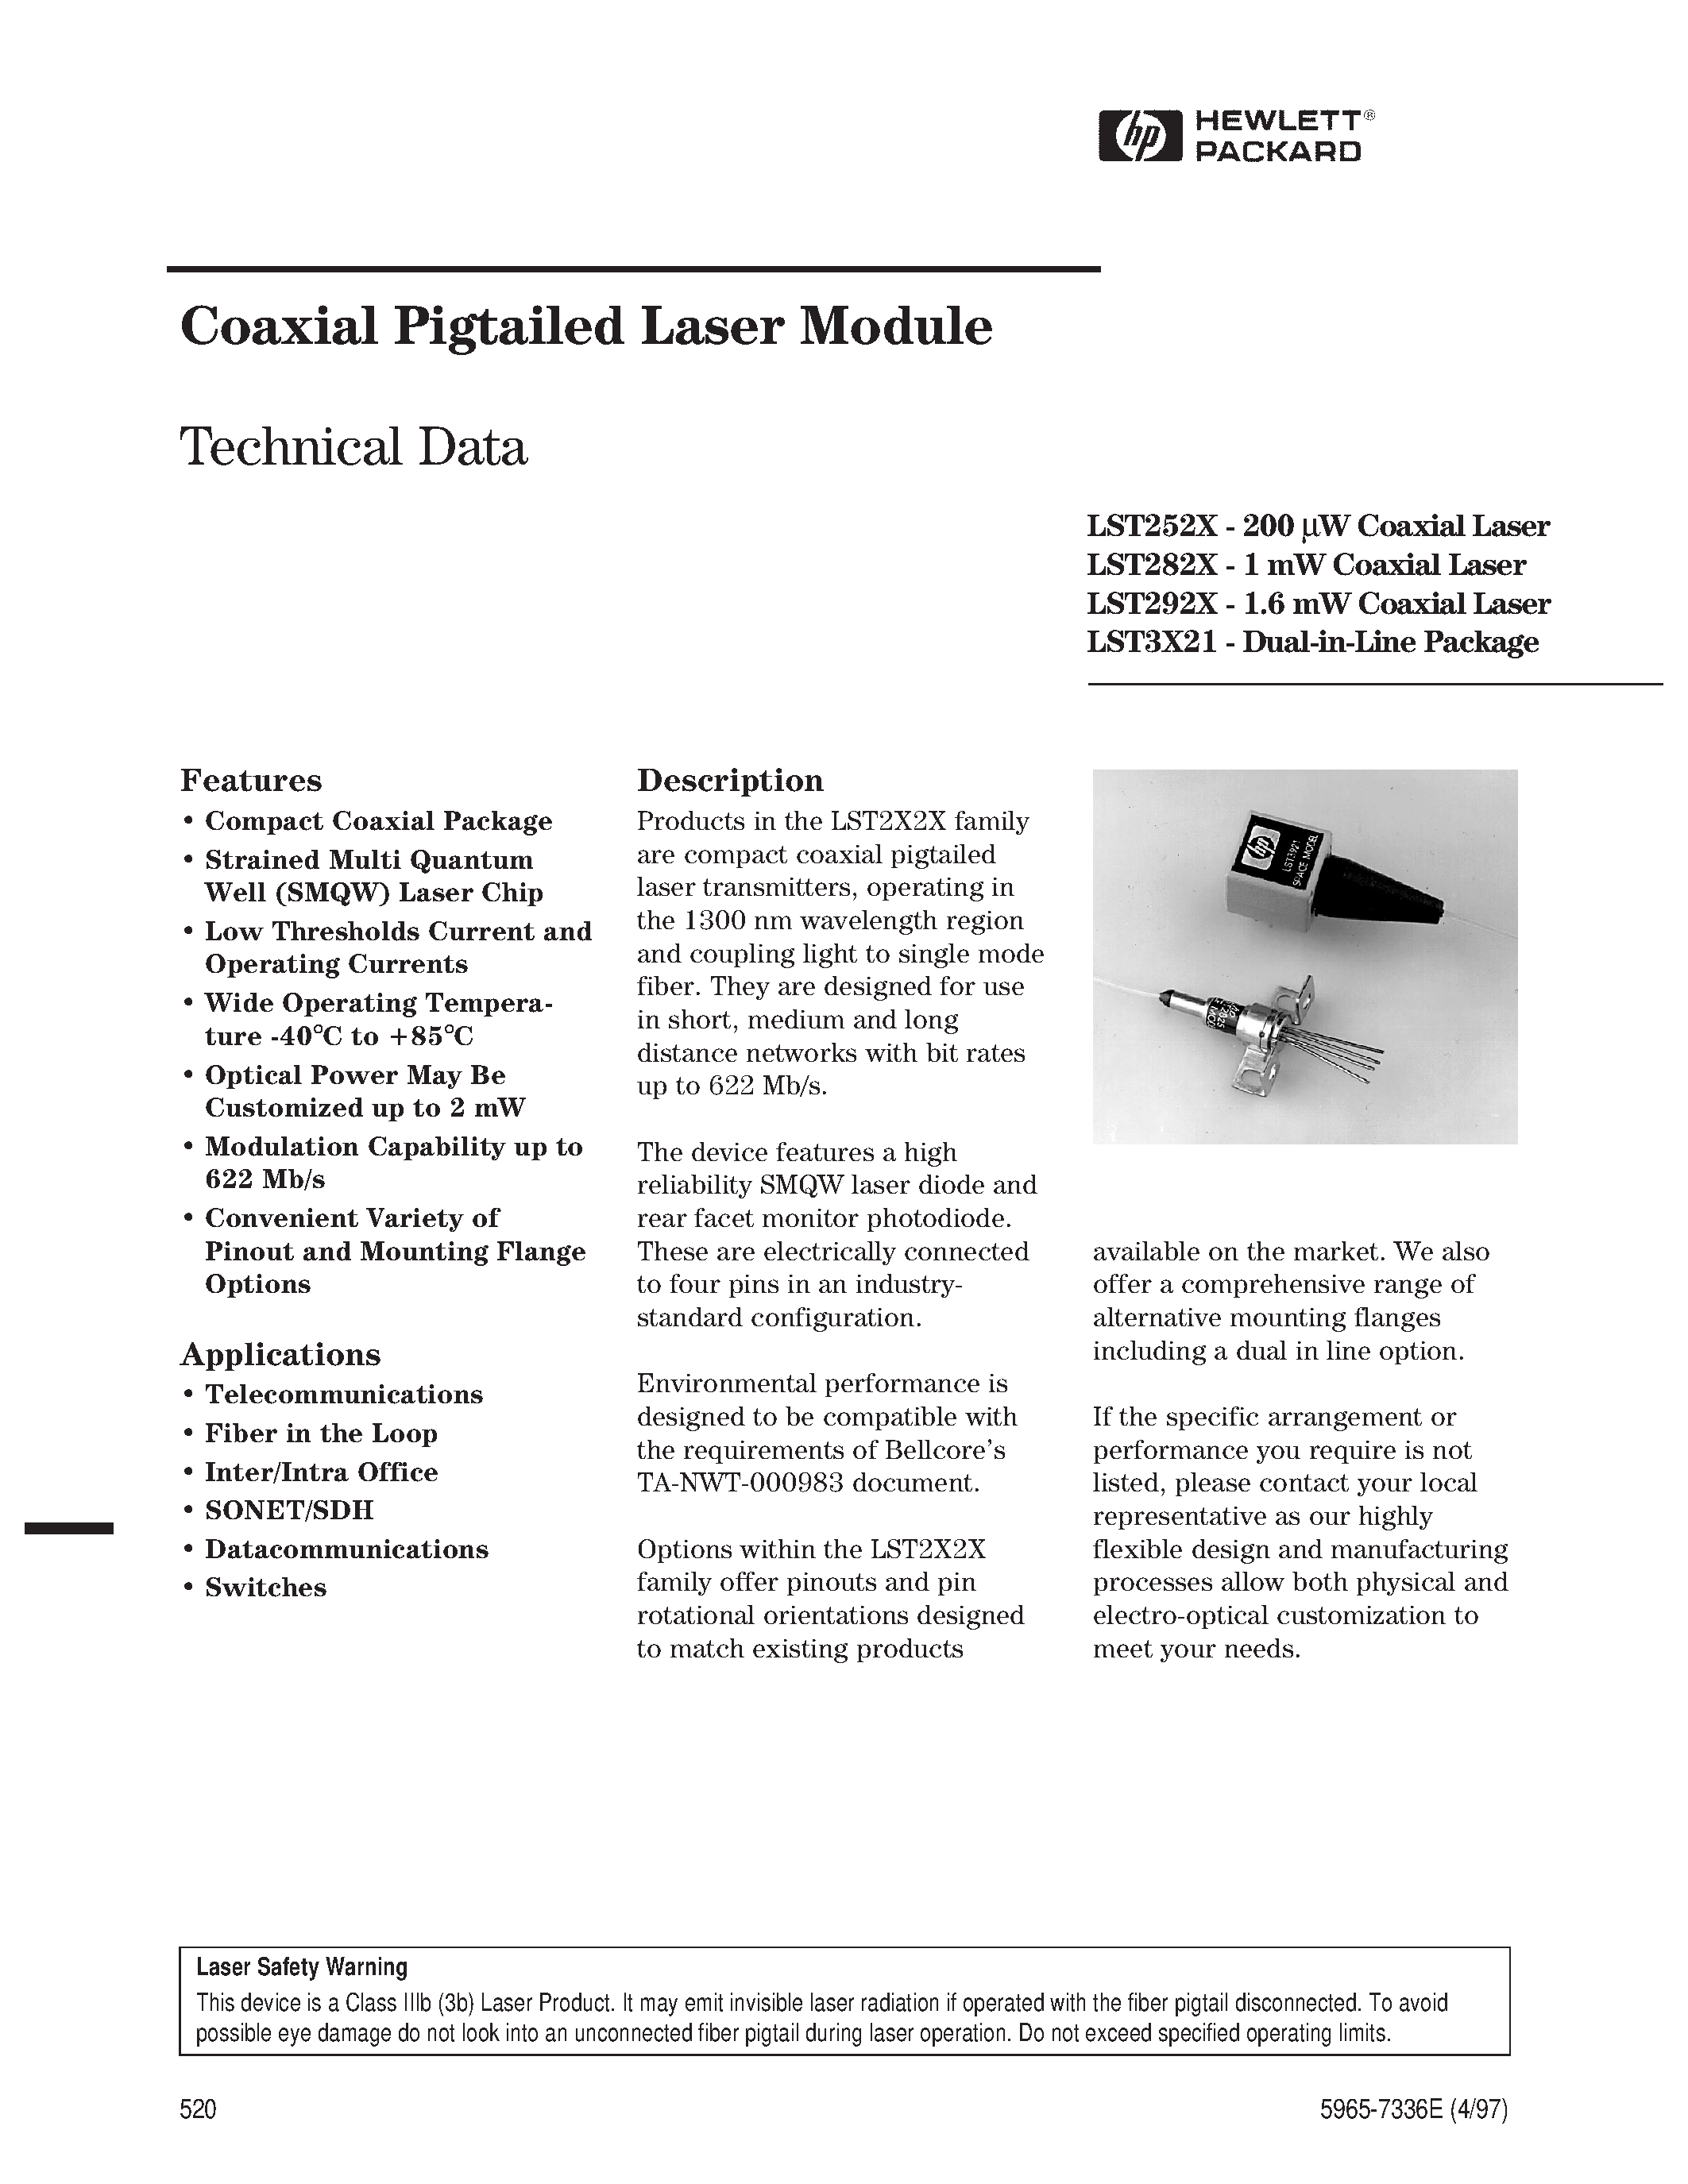 Даташит LST2925-S4-B-FP - Coaxial Pigtailed Laser Module страница 1